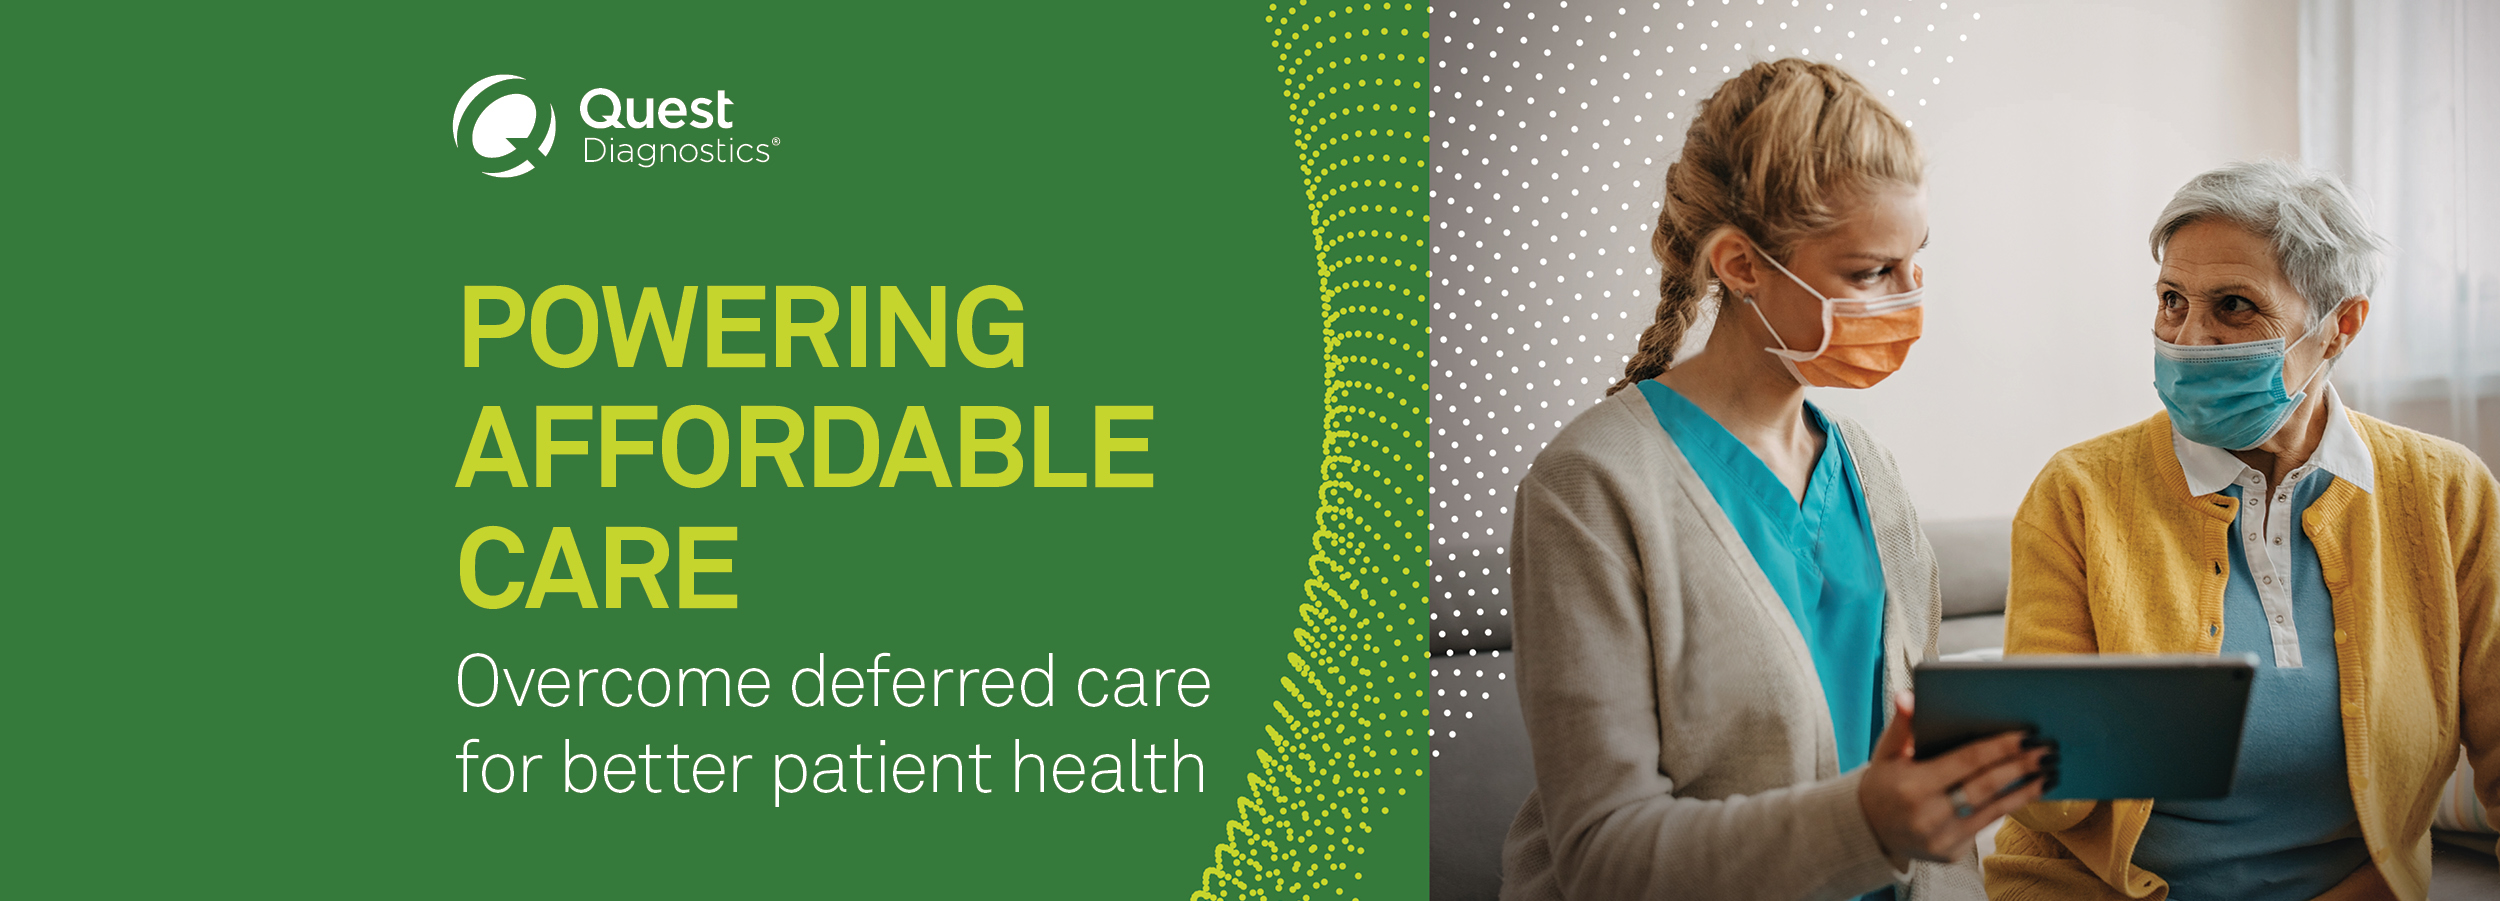 POWERING AFFORDABLE CARE / Overcome deferred care for better patient health 